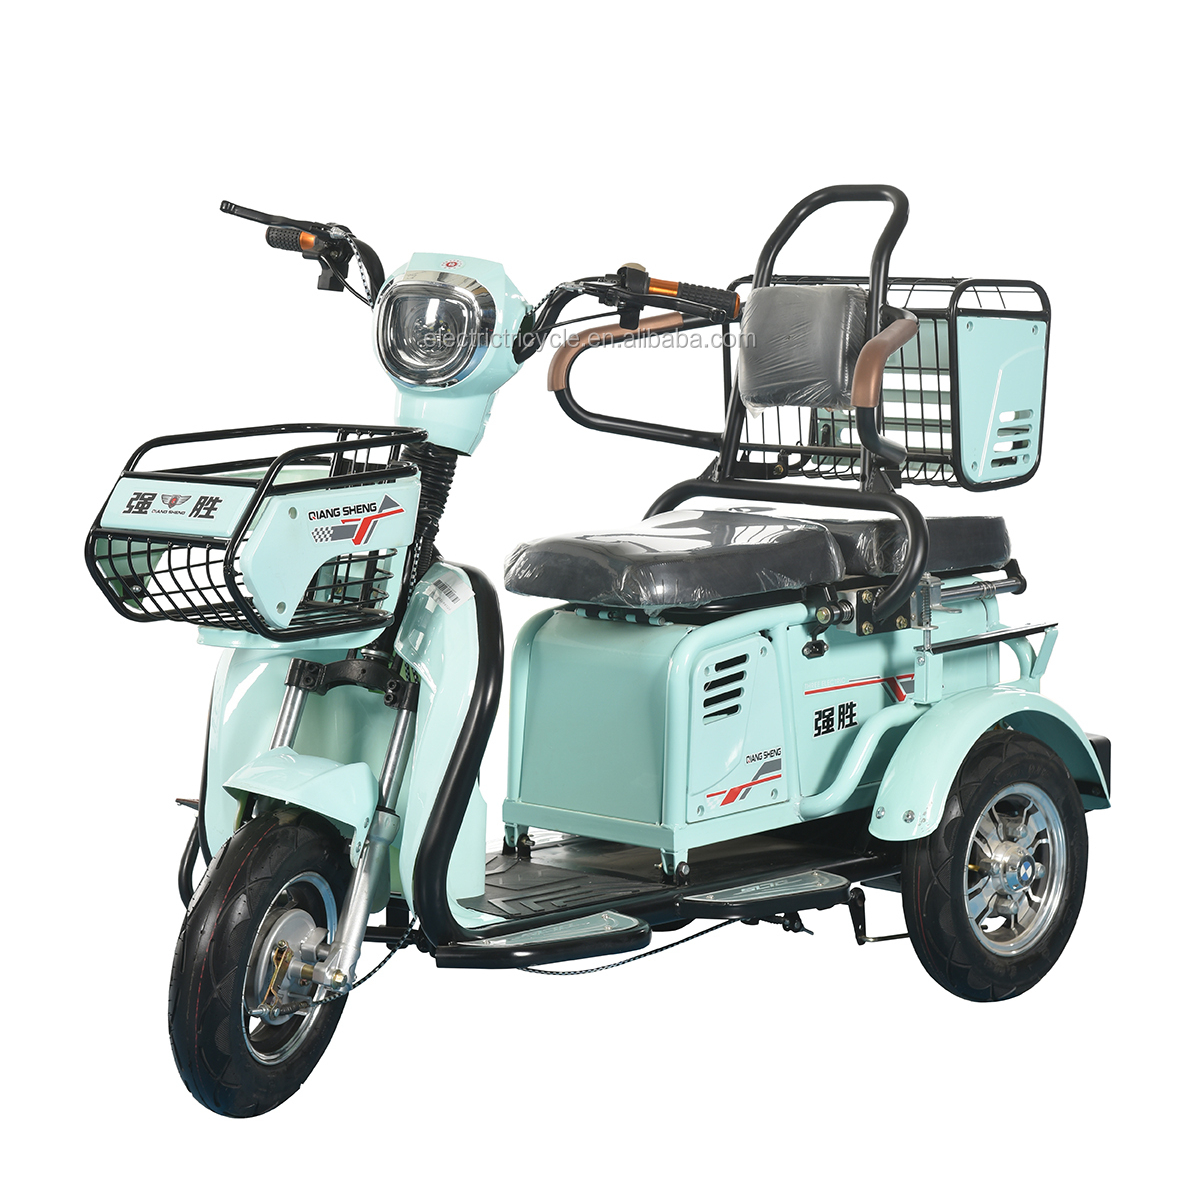 electric auto rickshaw Low Speed Electric Tricycle Rickshaw For Ladies And Seniour Citizens Special For Asian Market